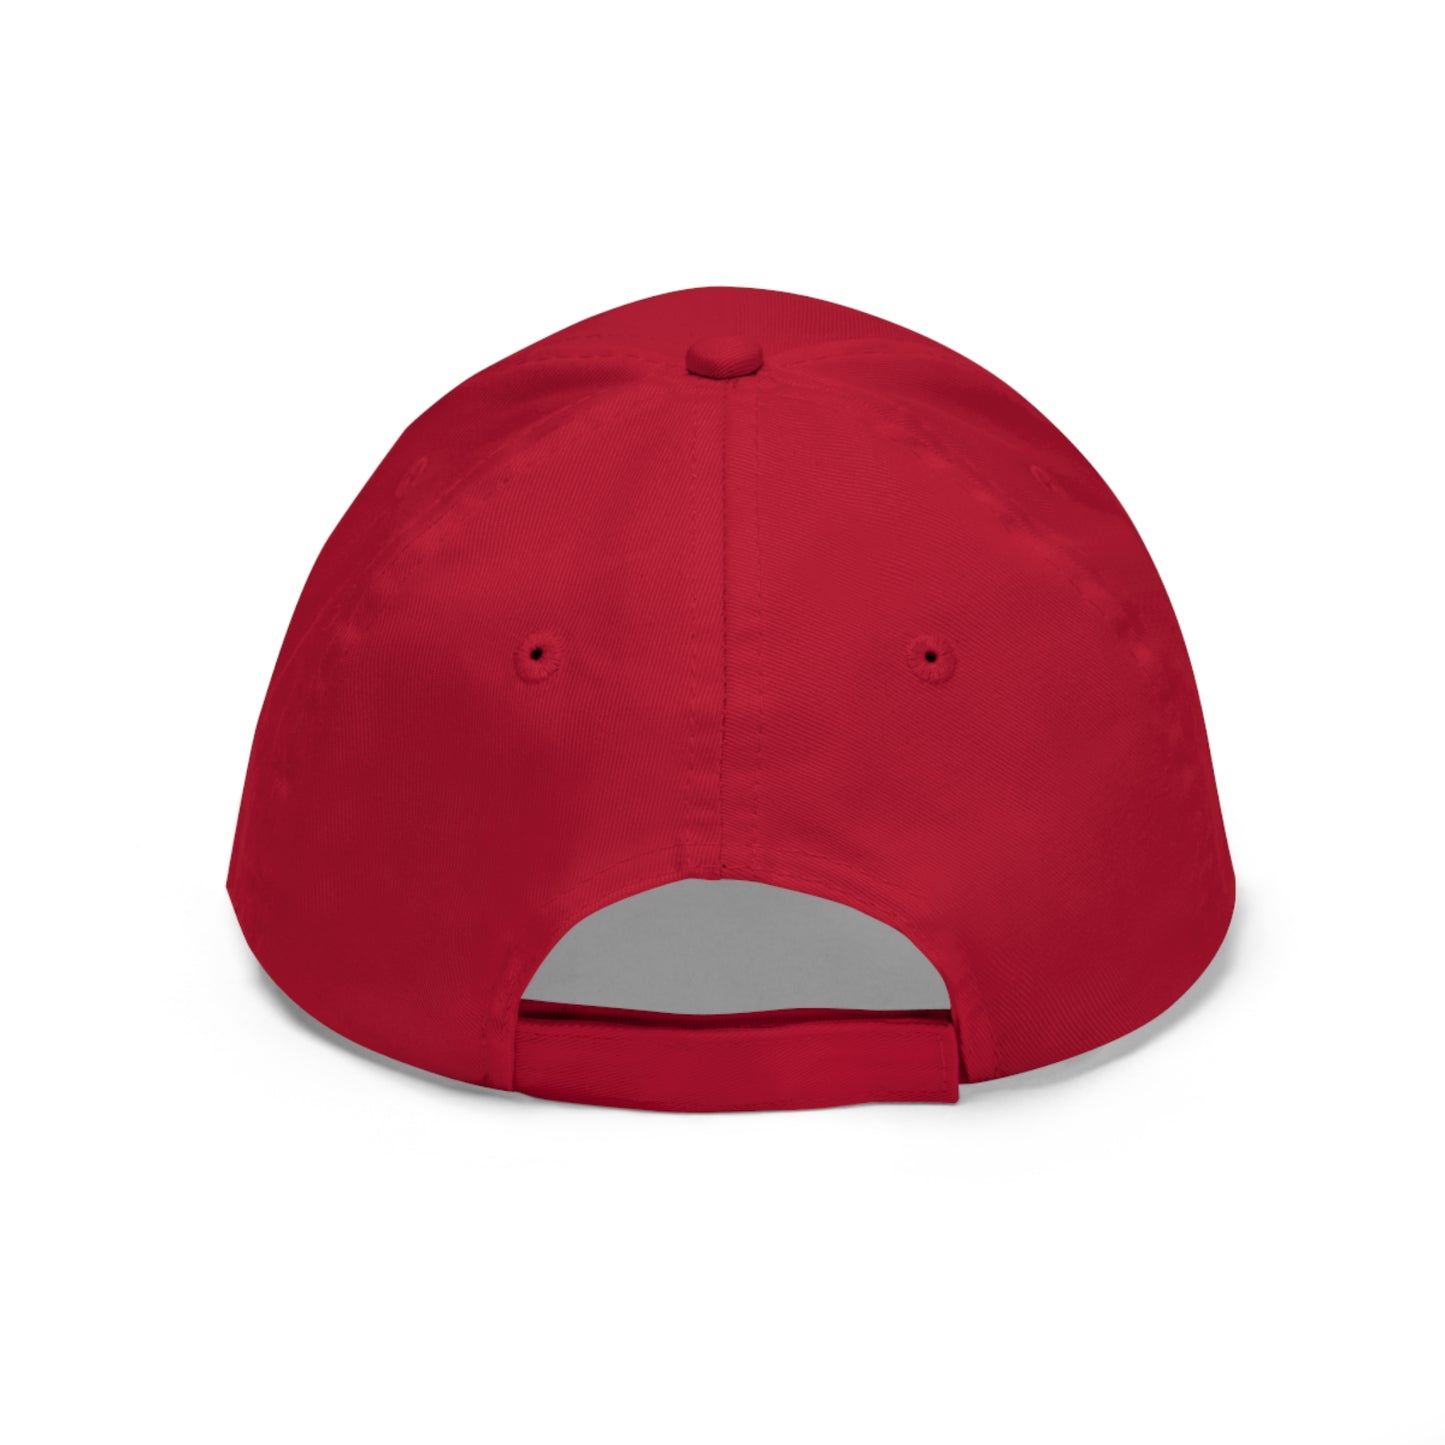 944 CHALLENGE Embroidered cap - red